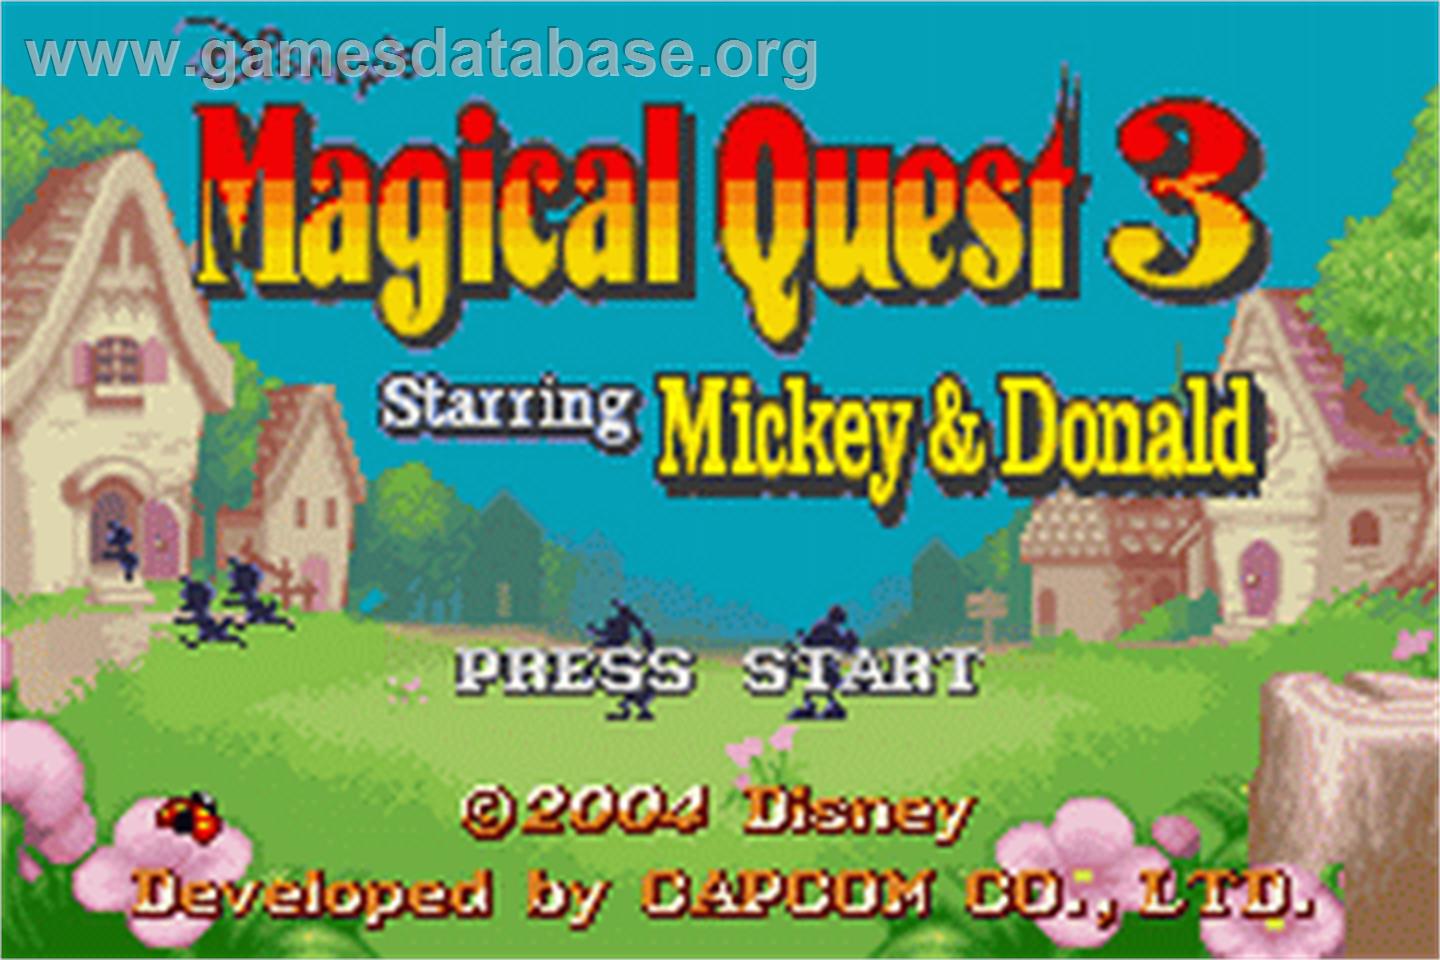 Magical Quest 3 starring Mickey and Donald - Nintendo Game Boy Advance - Artwork - Title Screen